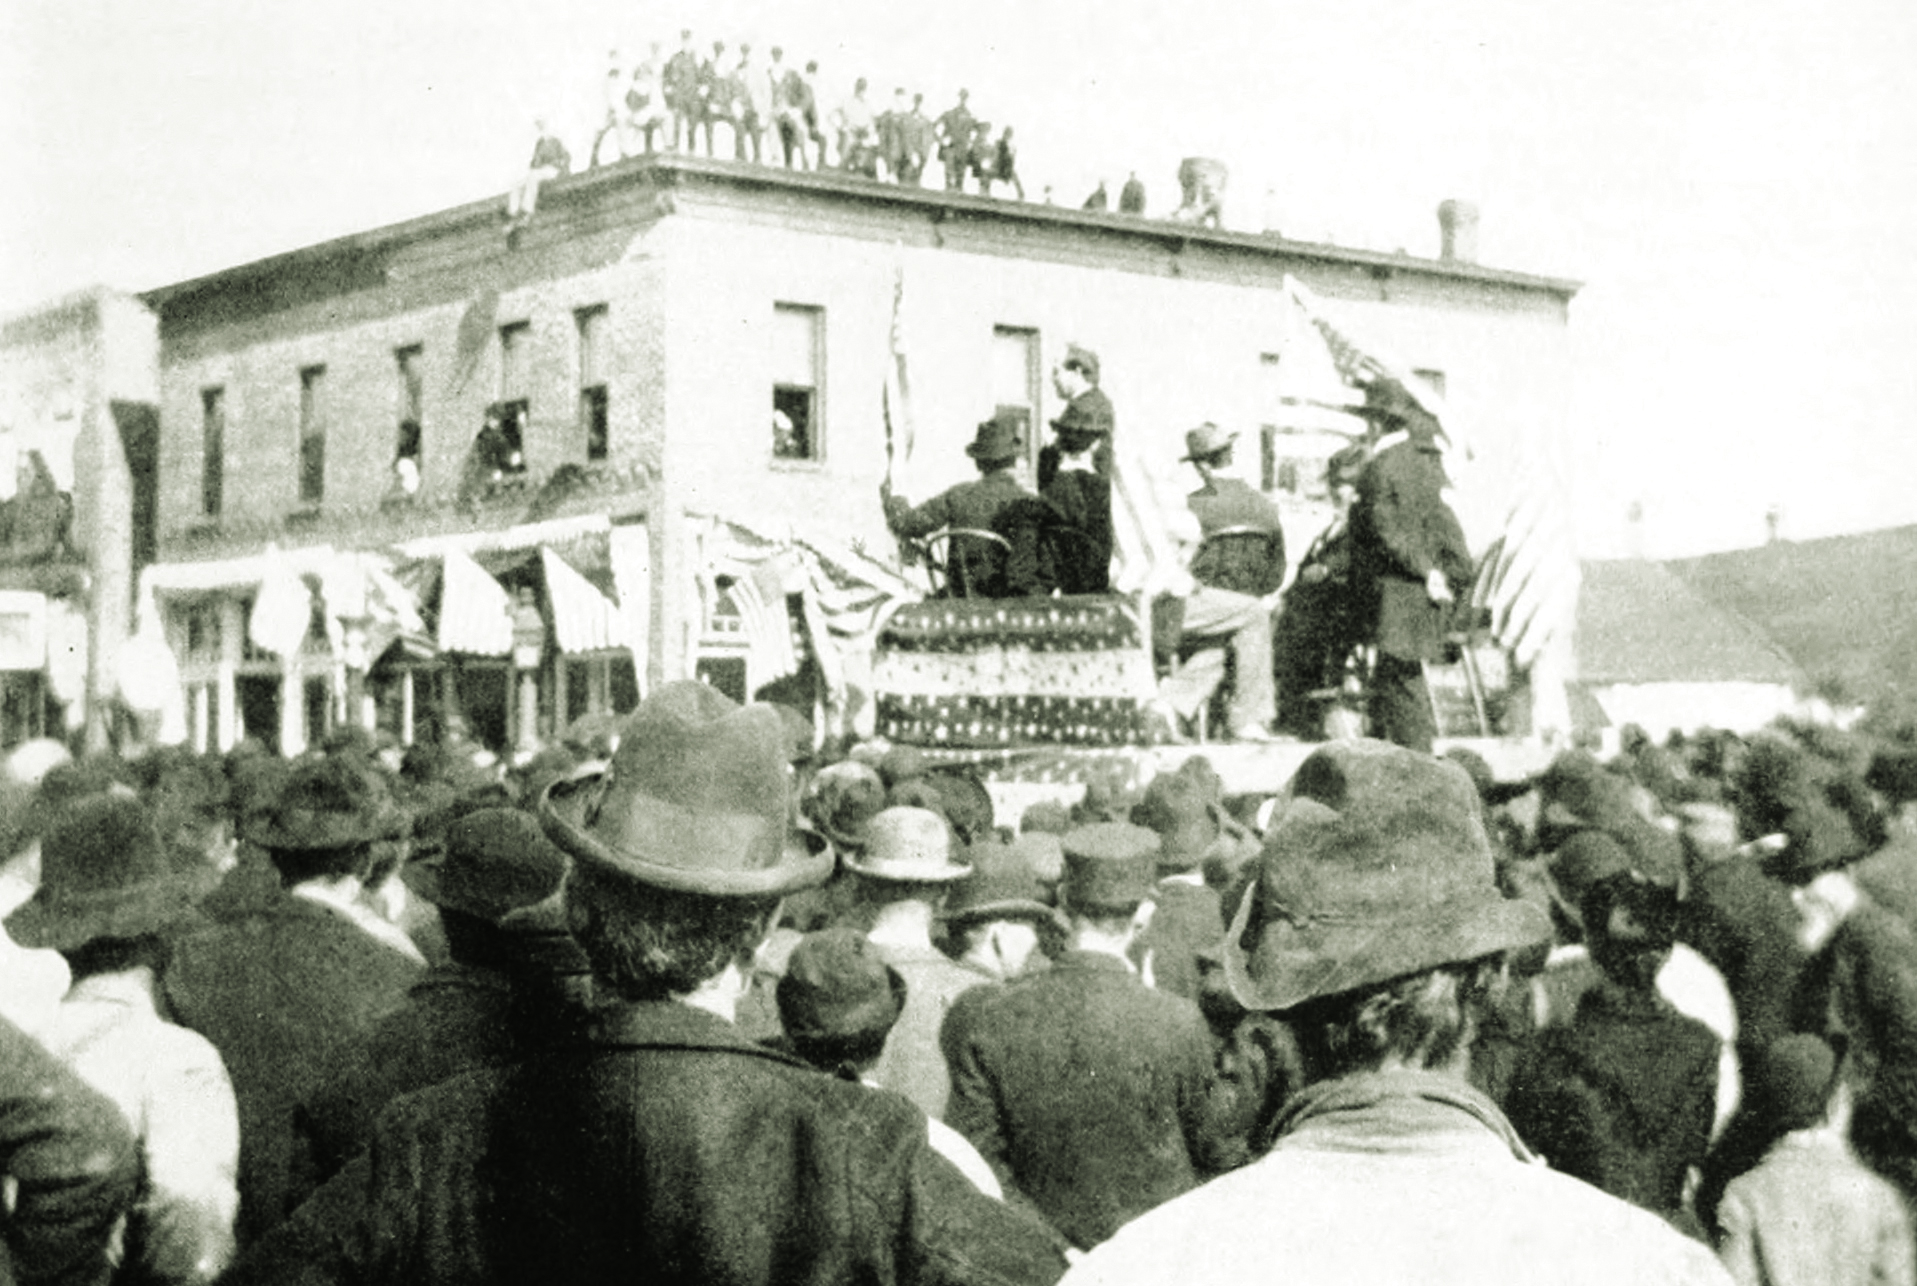 Photo showing Nebraskans attend a political rally in the 1870s (Smithsonian Institution Press via Flickr)